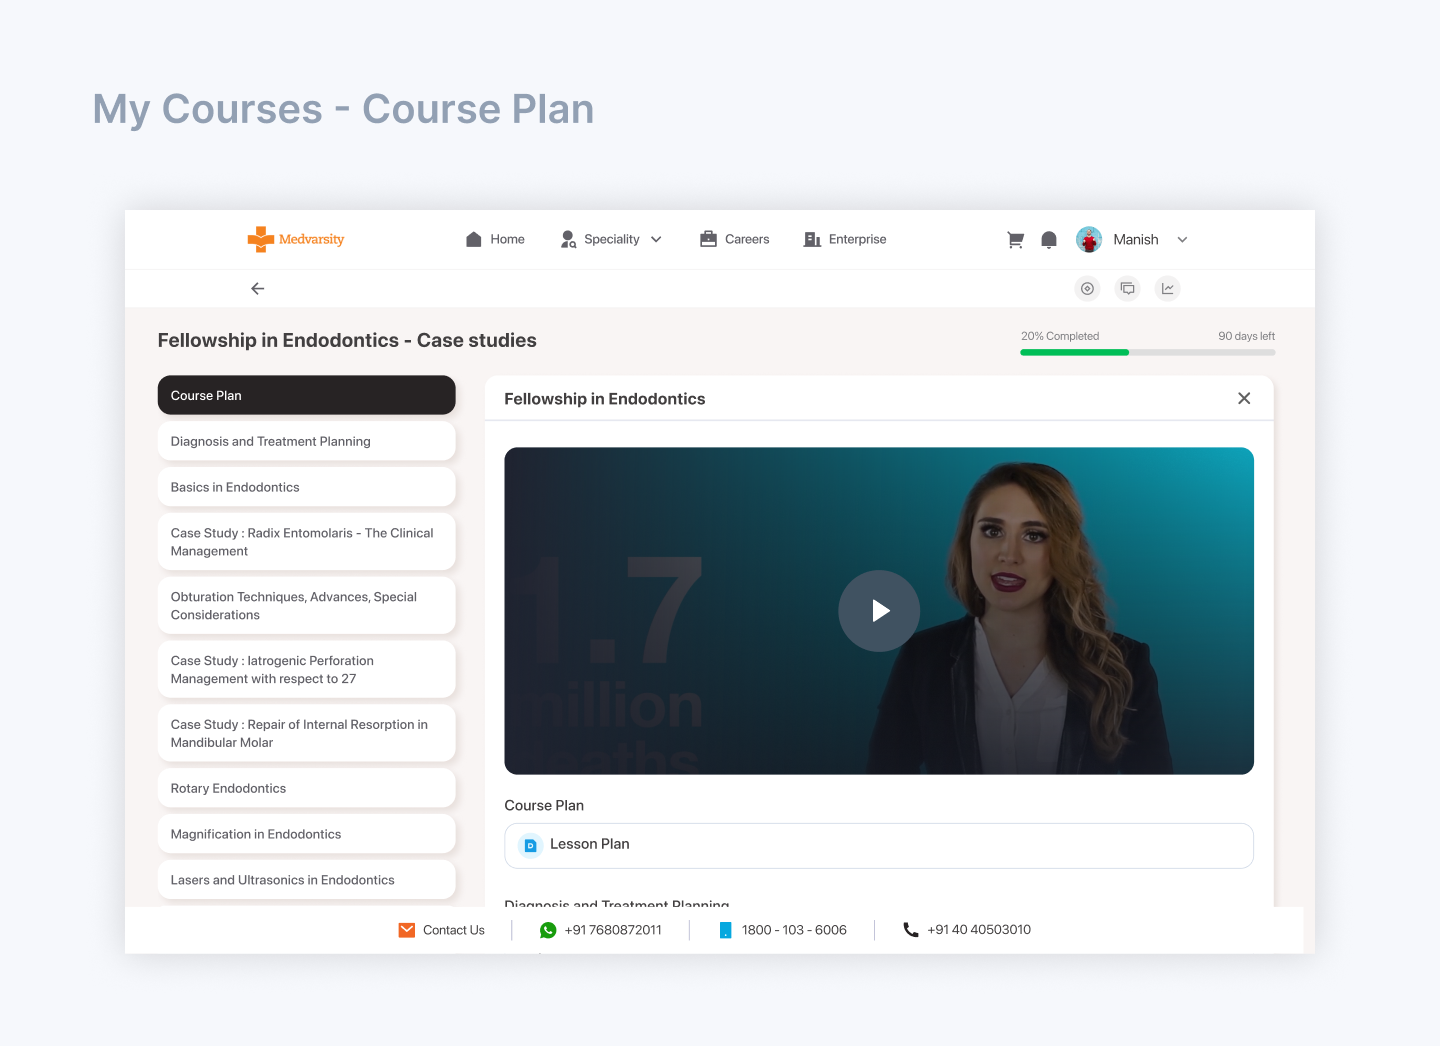 3 My Courses - Course Plan